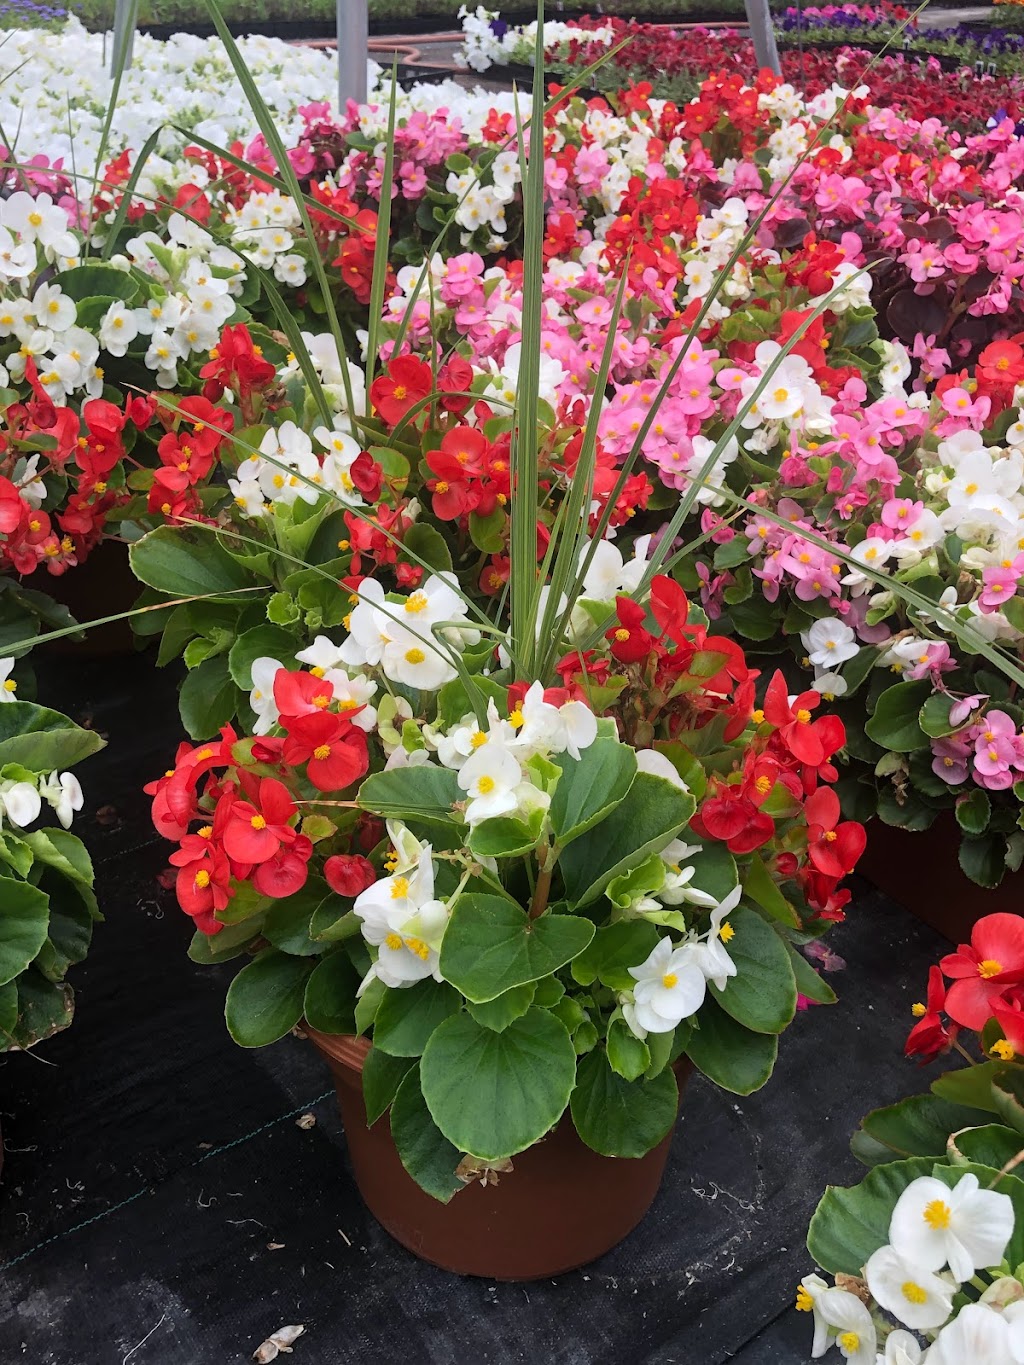 Comiskys Greenhouses Inc. | 115 Manlove Ave, Hightstown, NJ 08520 | Phone: (609) 448-1705